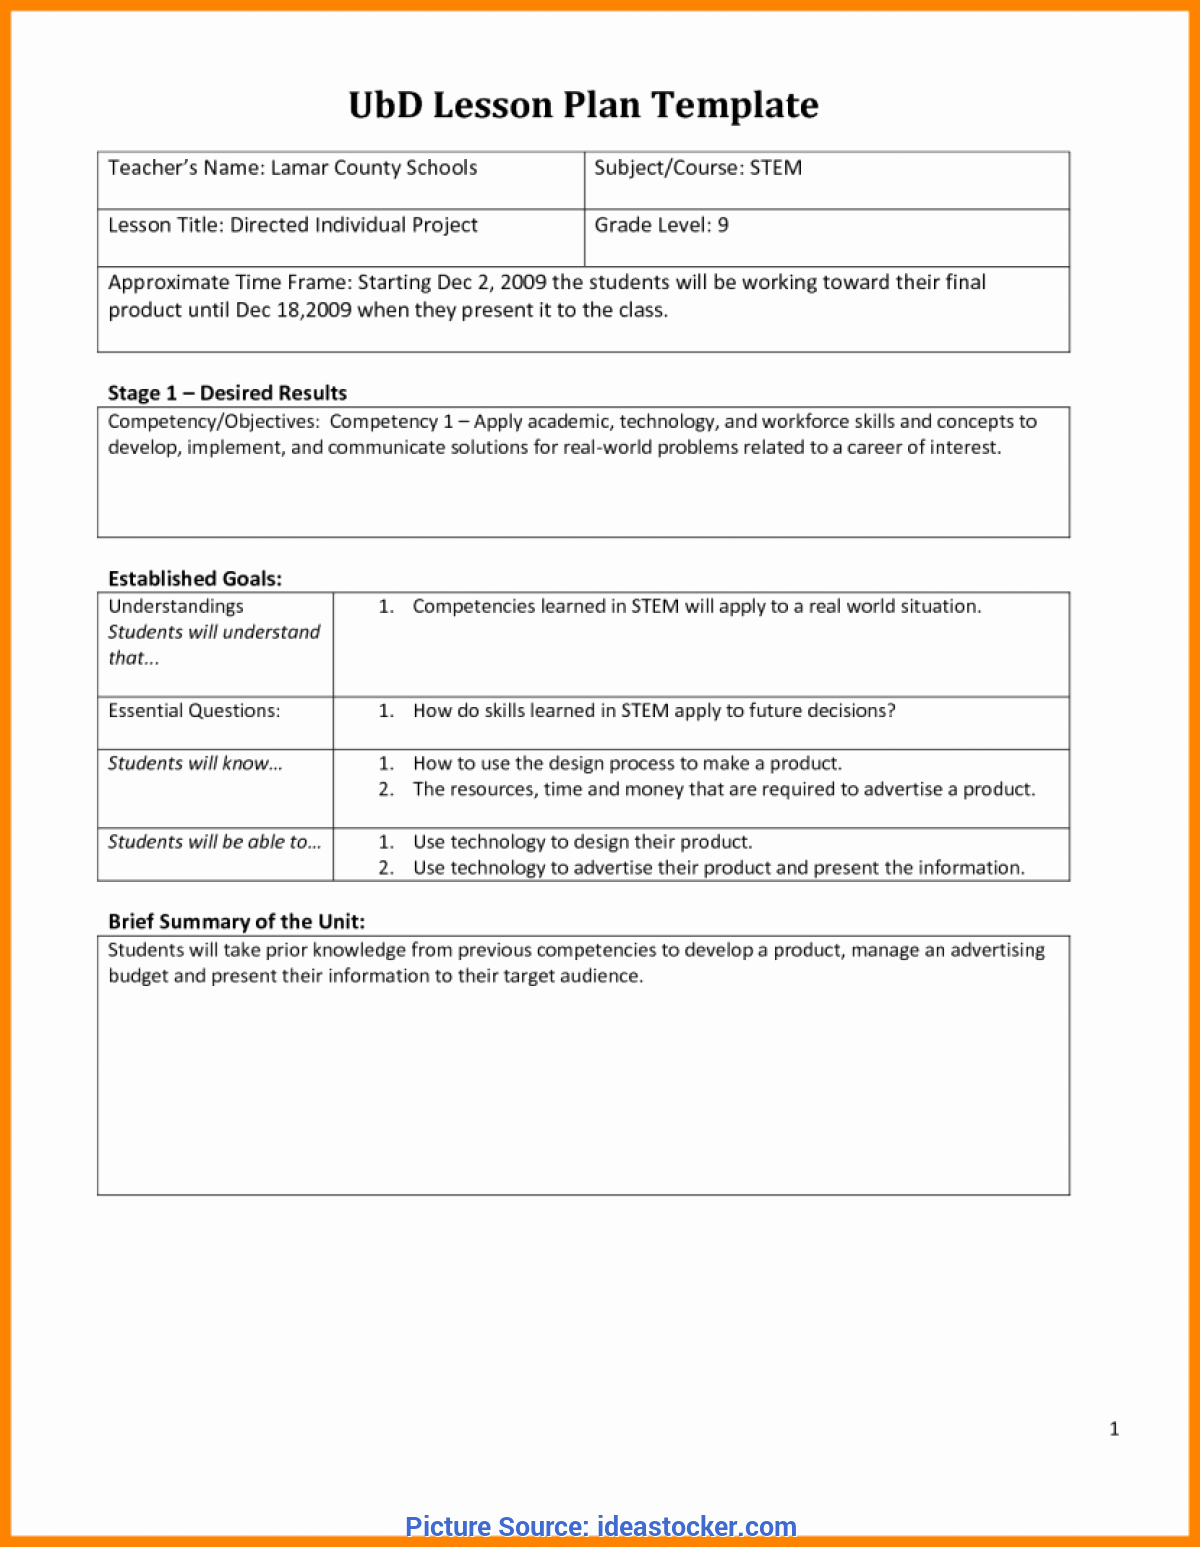 7 Step Lesson Plan Inspirational Special Madeline Hunter S Seven Step Lesson Plan Model Eei Lesson Plan Template Lesson Plan